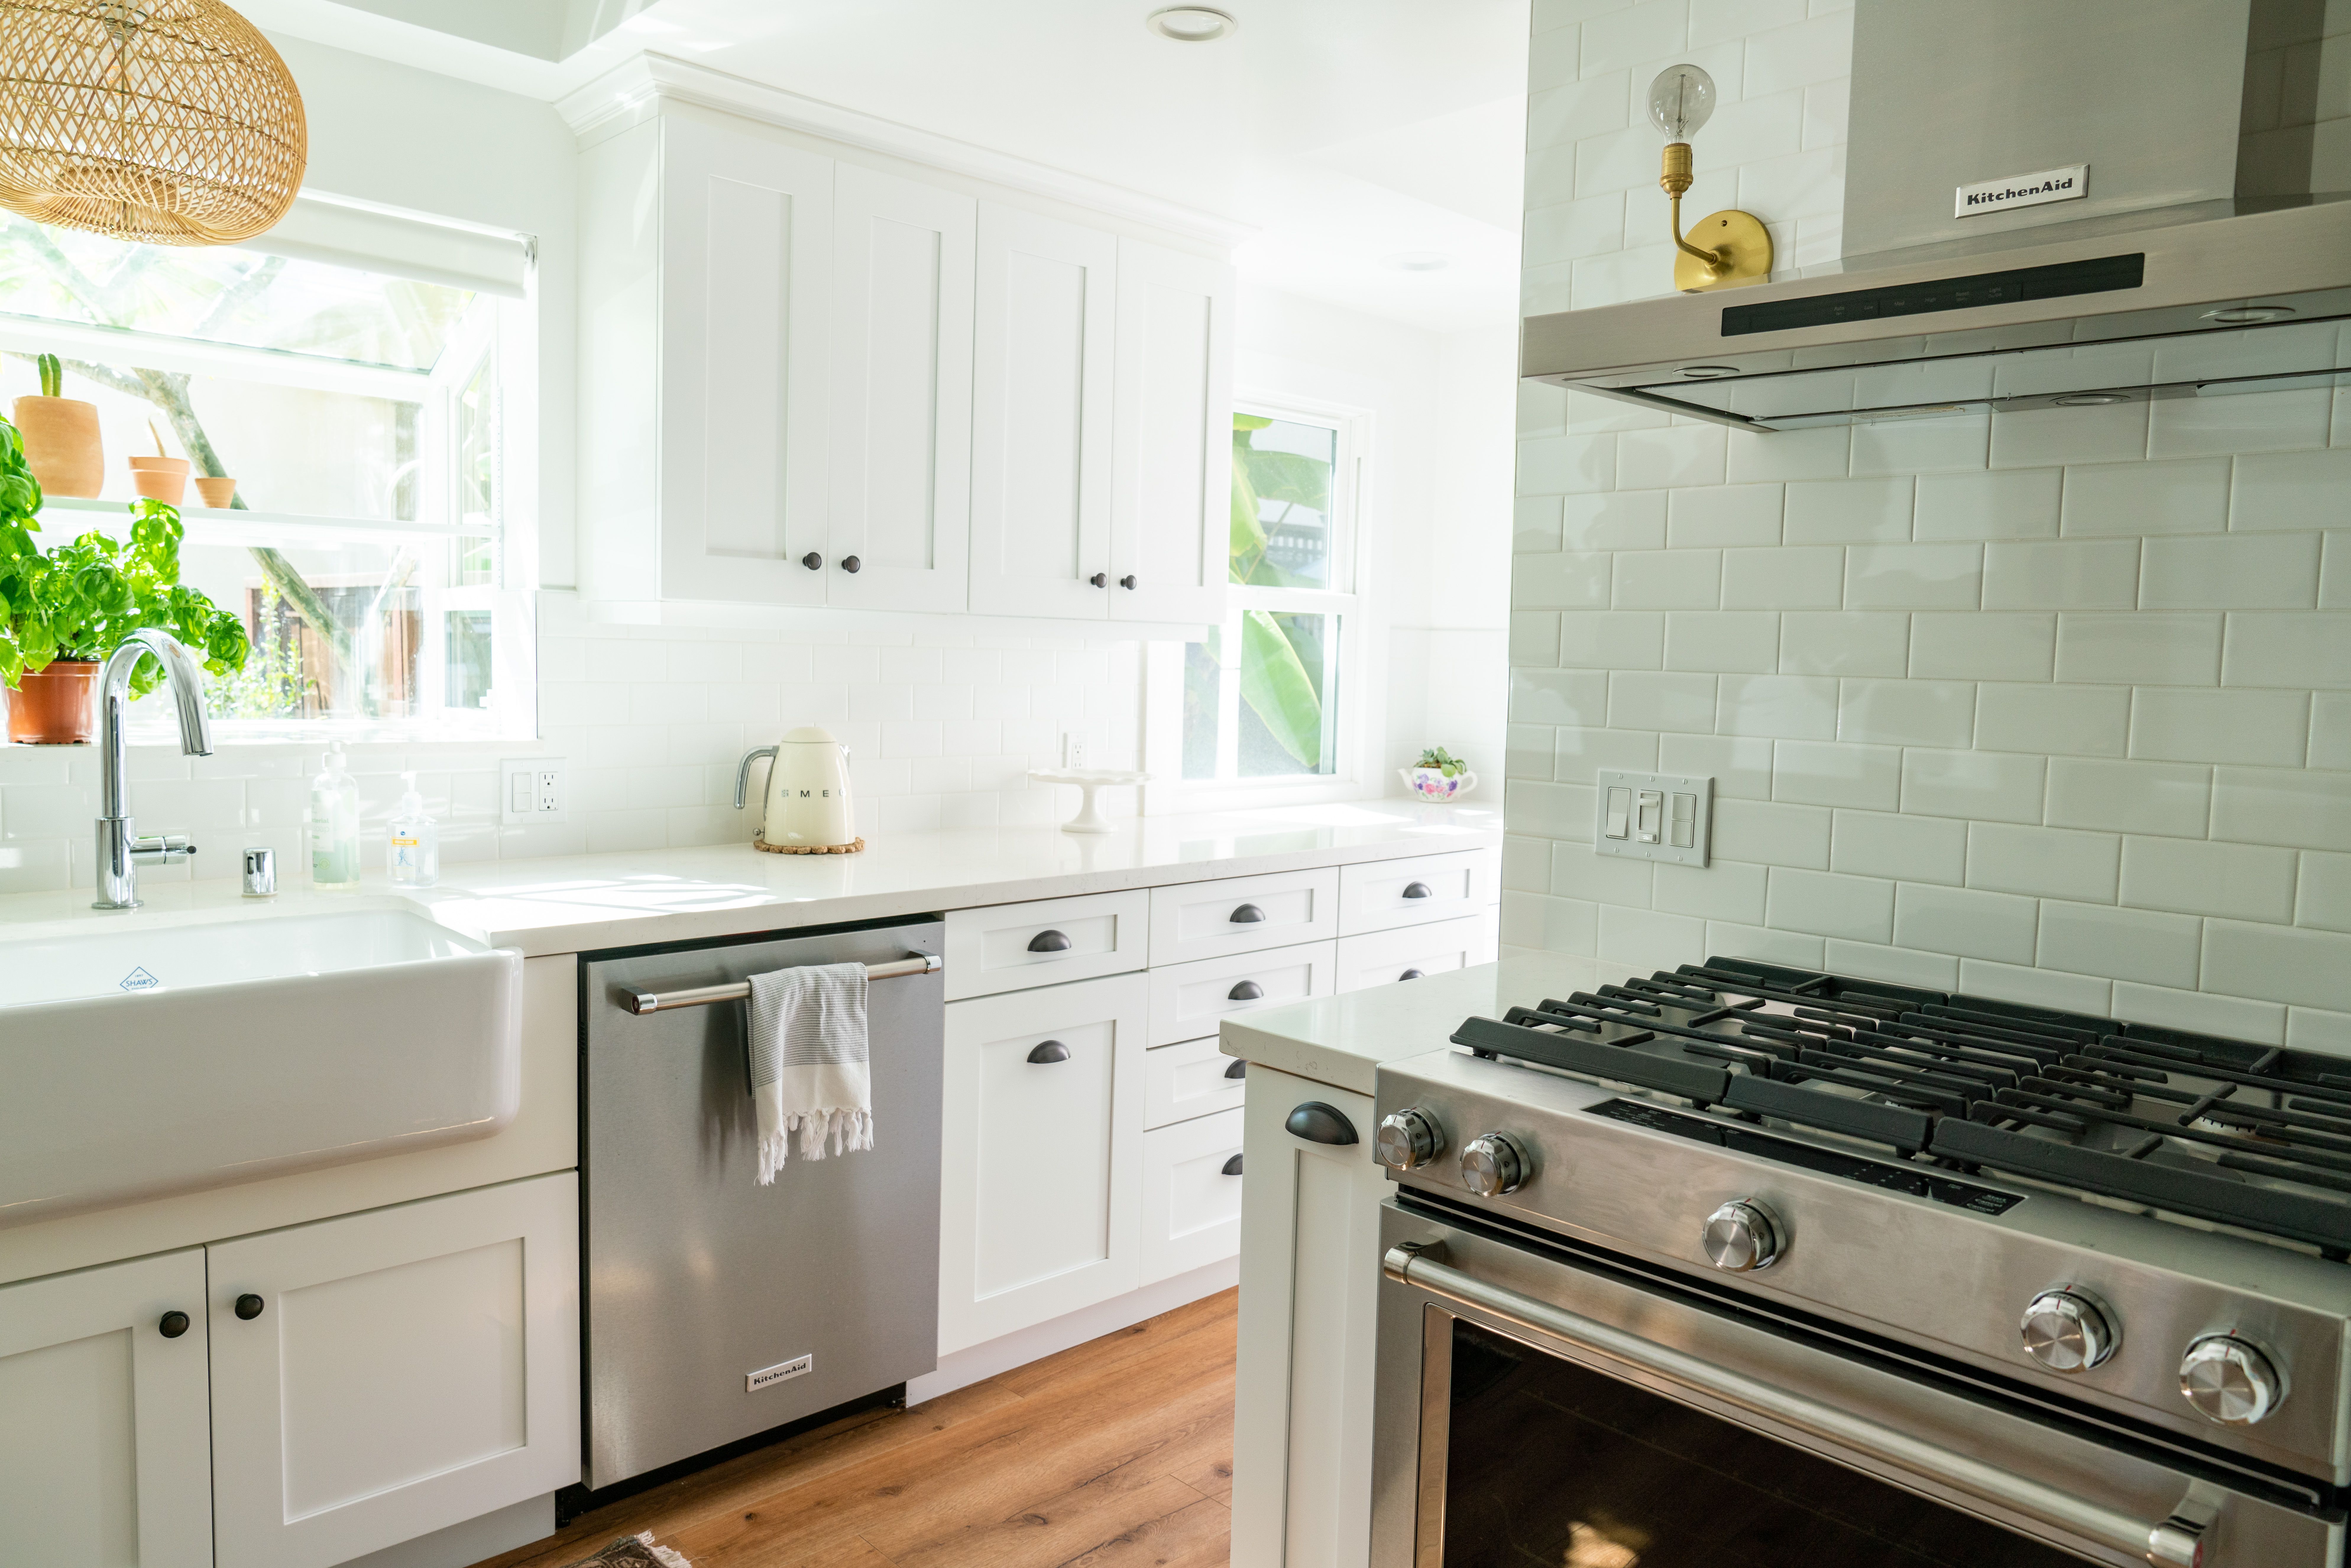 4 Tricks to Make a Small Kitchen Look Larger